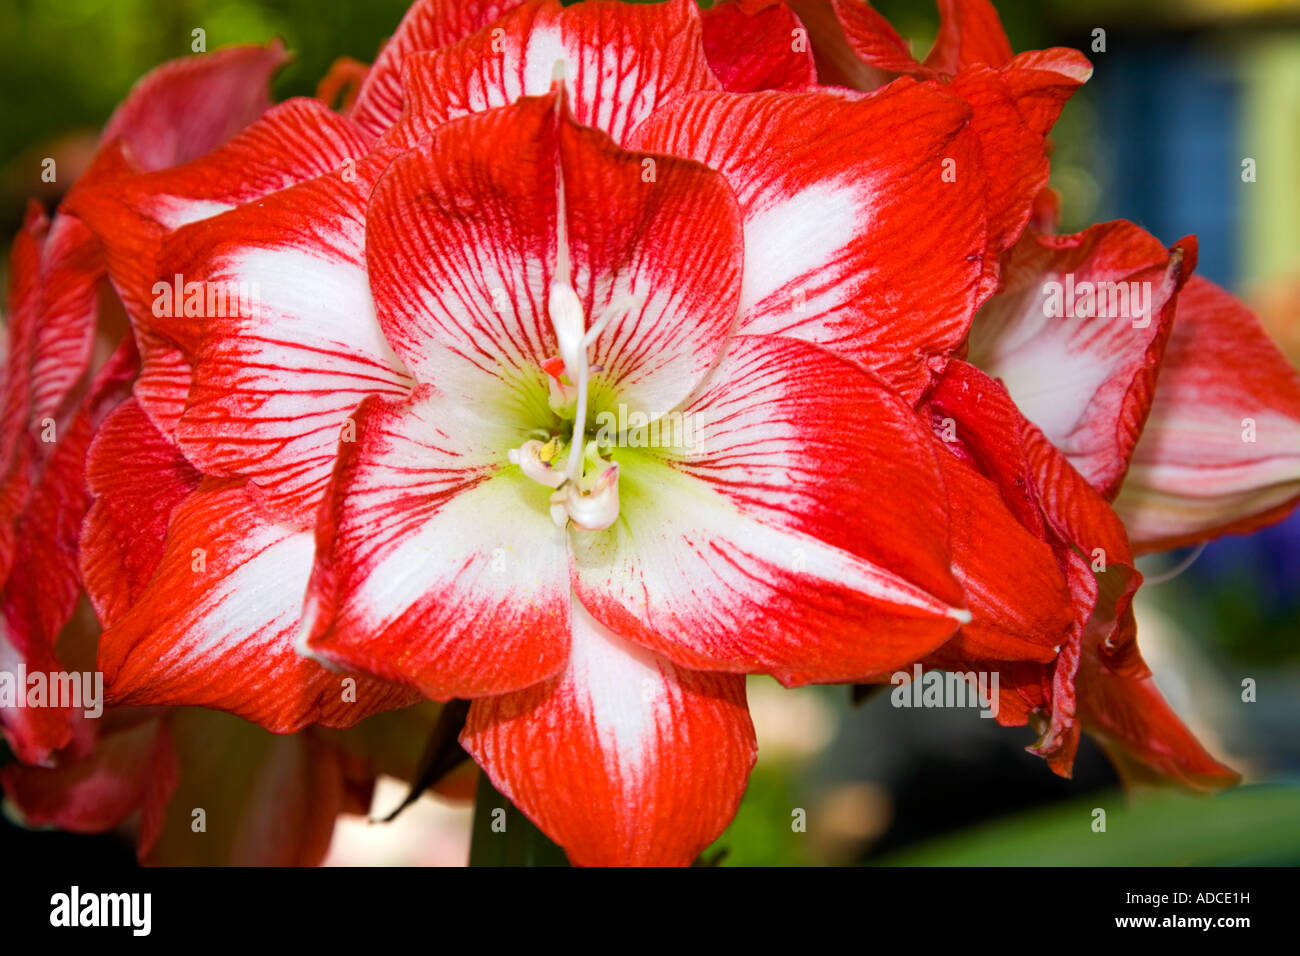 Amaryllis flower red with white strips Stock Photo